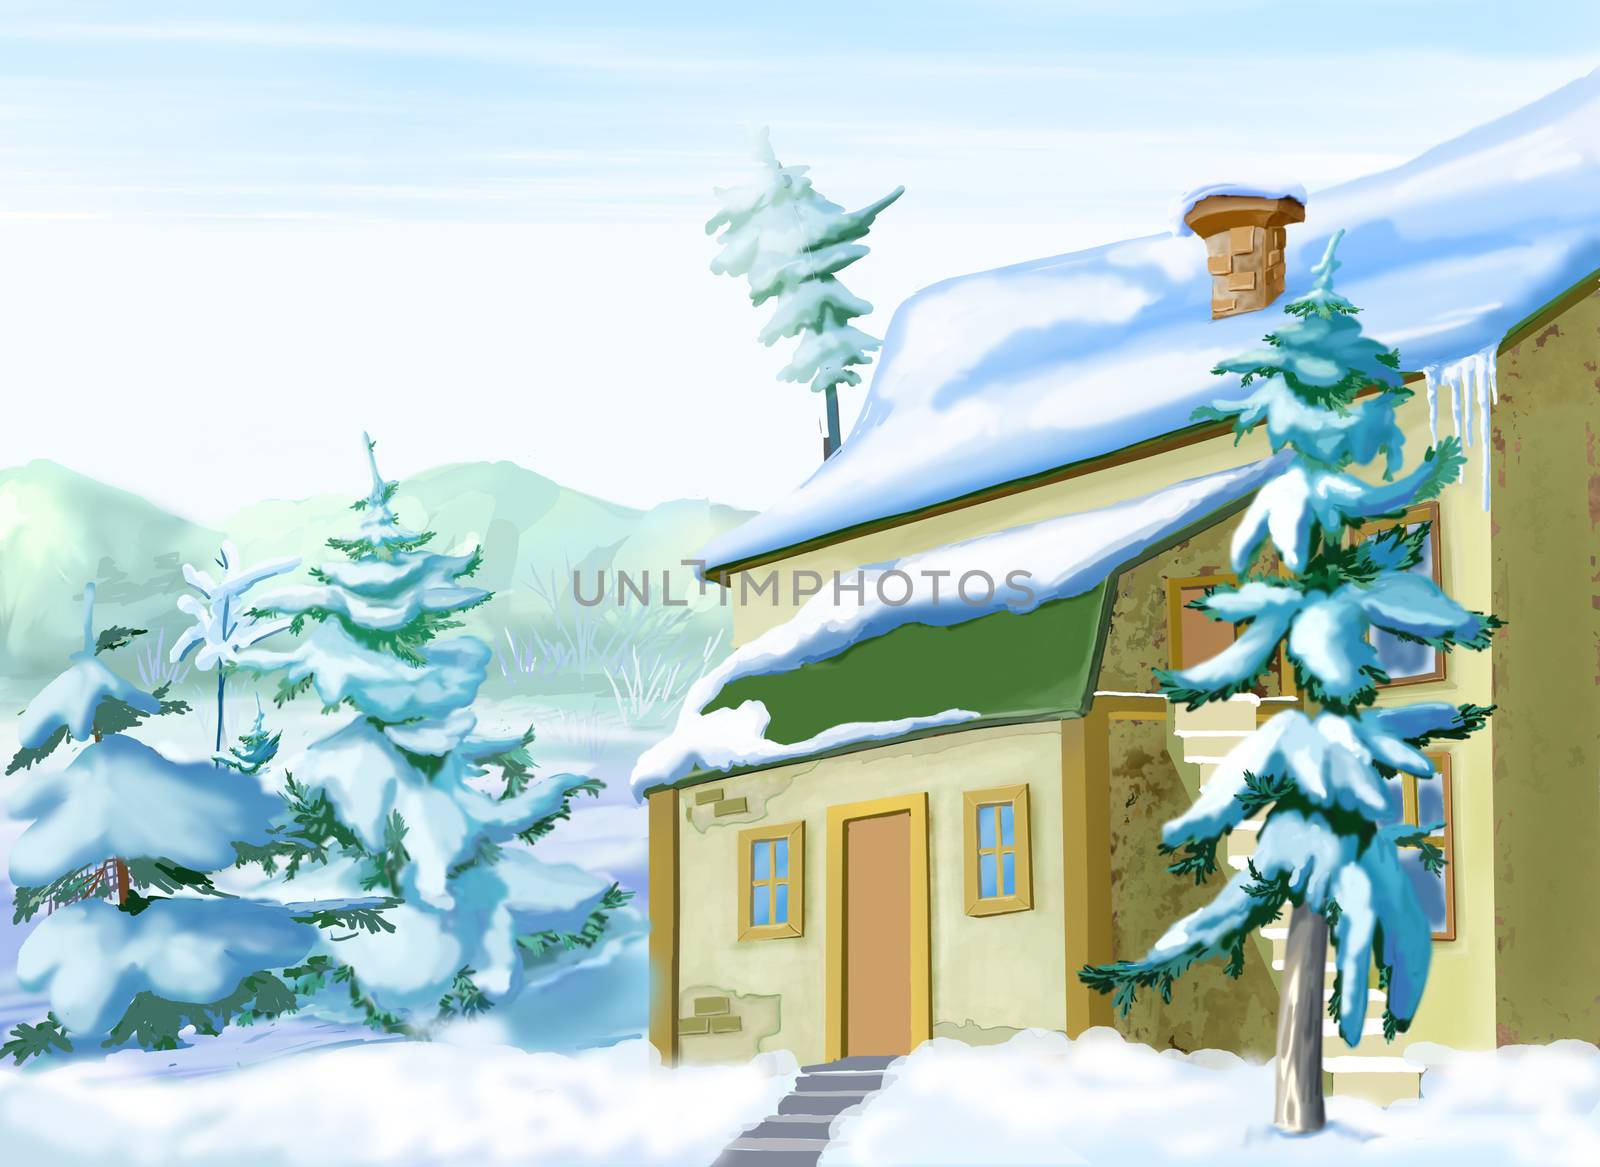 Snow Covered Vacation Home in a Snowy Winter Day. Handmade illustration in a classic cartoon style.